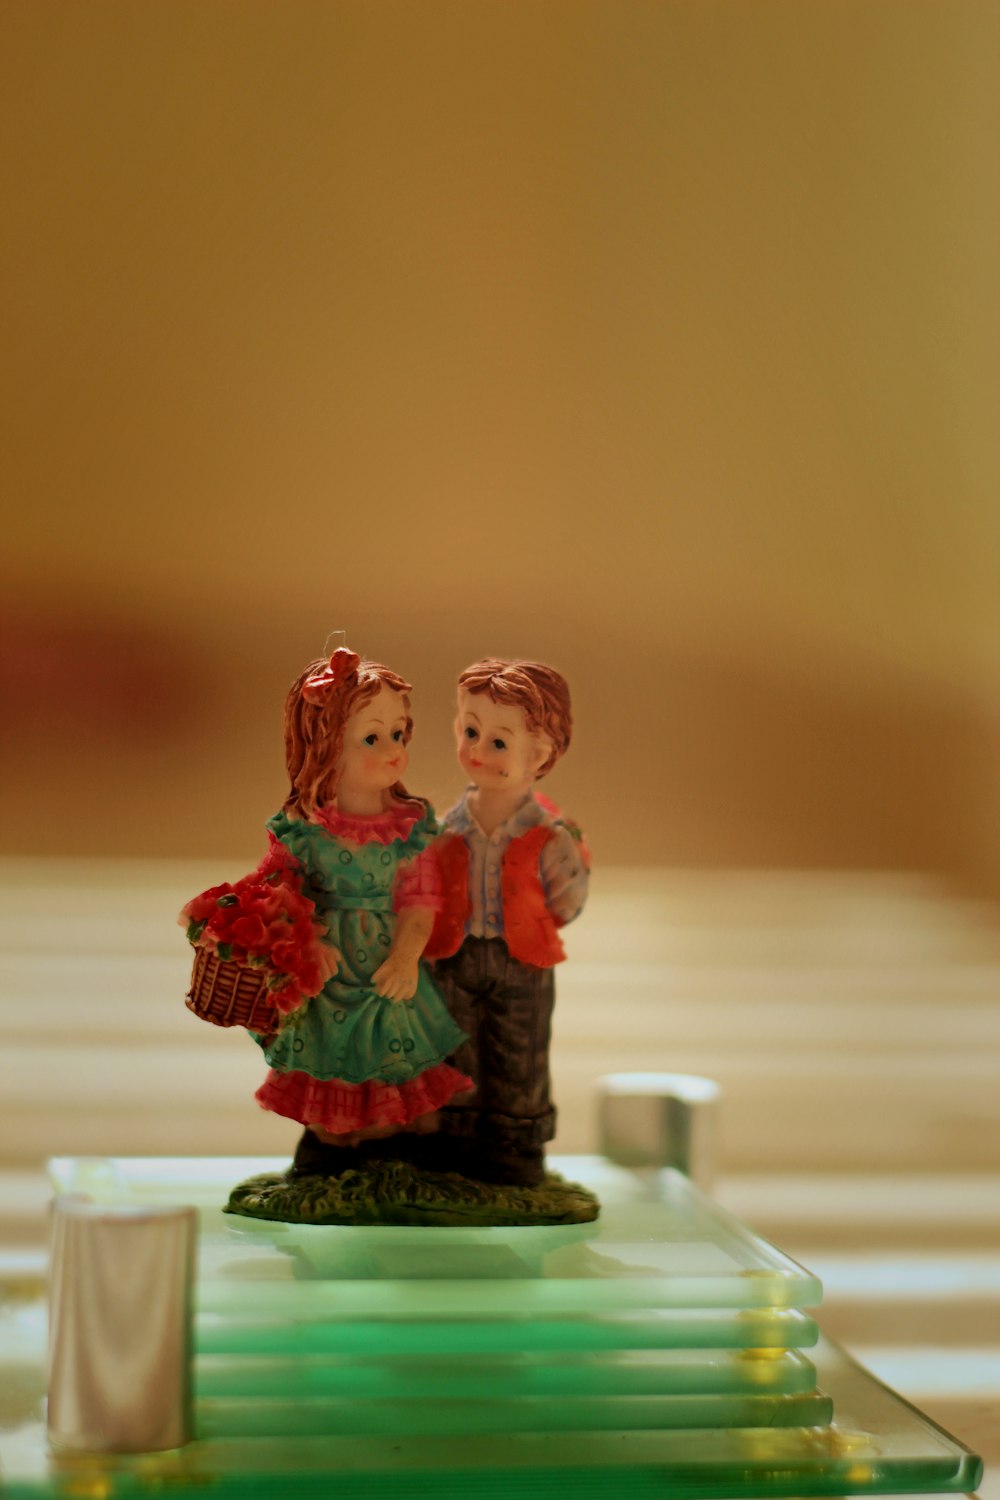 a figurine of a man and a woman on a table